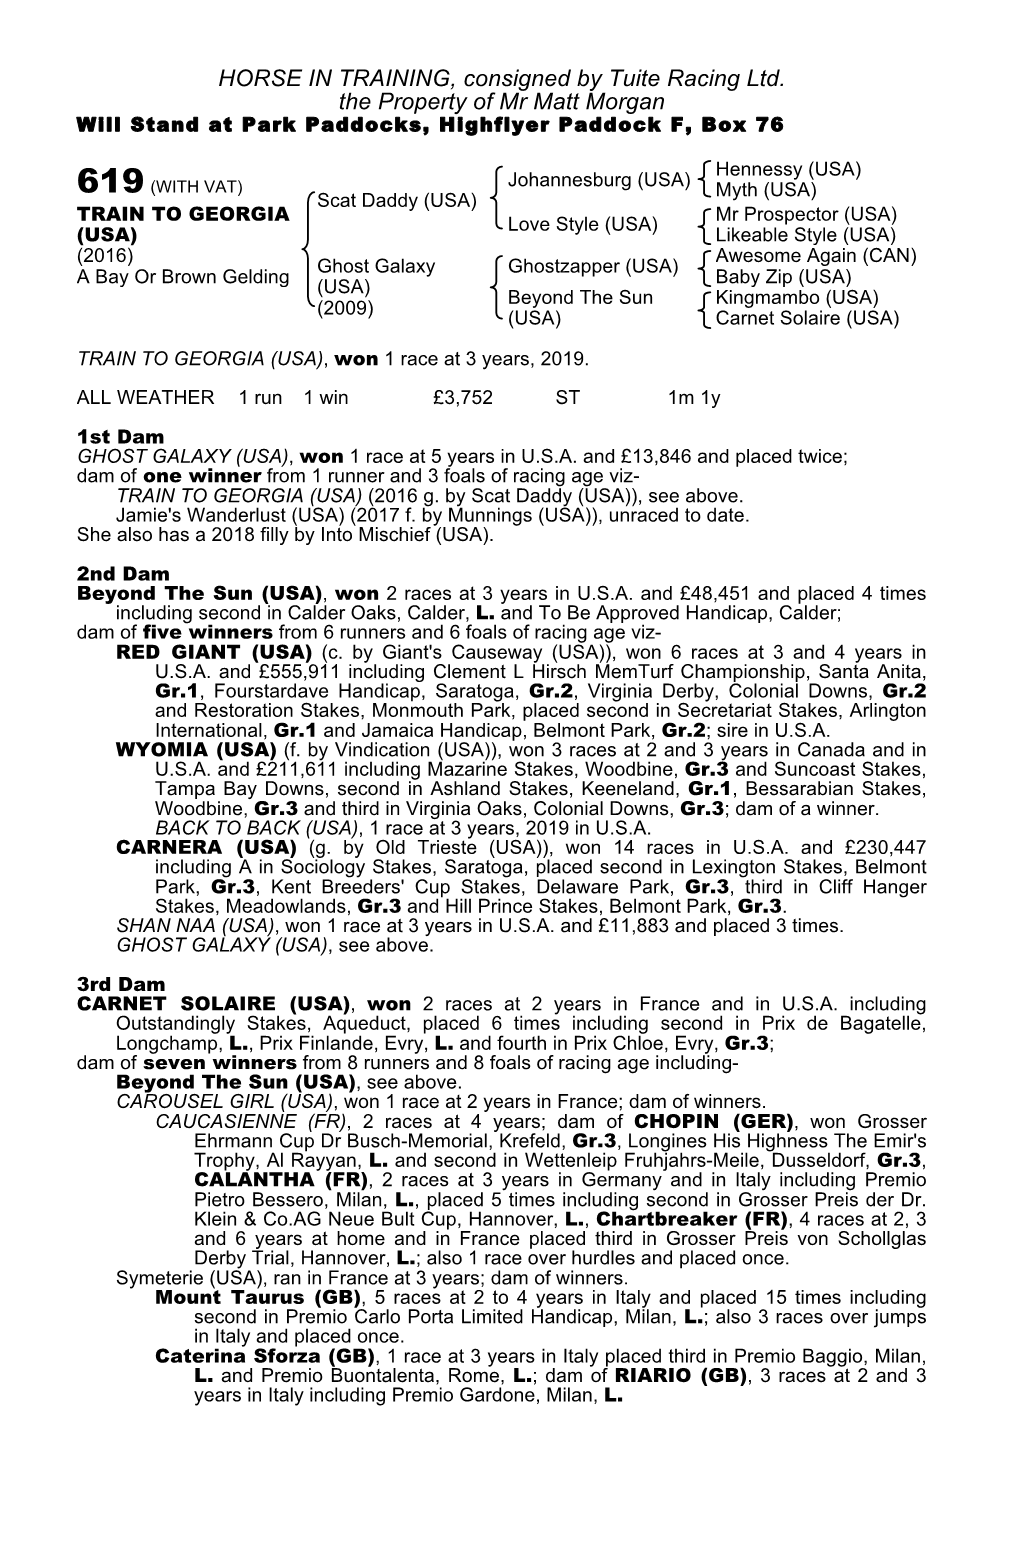 HORSE in TRAINING, Consigned by Tuite Racing Ltd. the Property of Mr Matt Morgan Will Stand at Park Paddocks, Highflyer Paddock F, Box 76